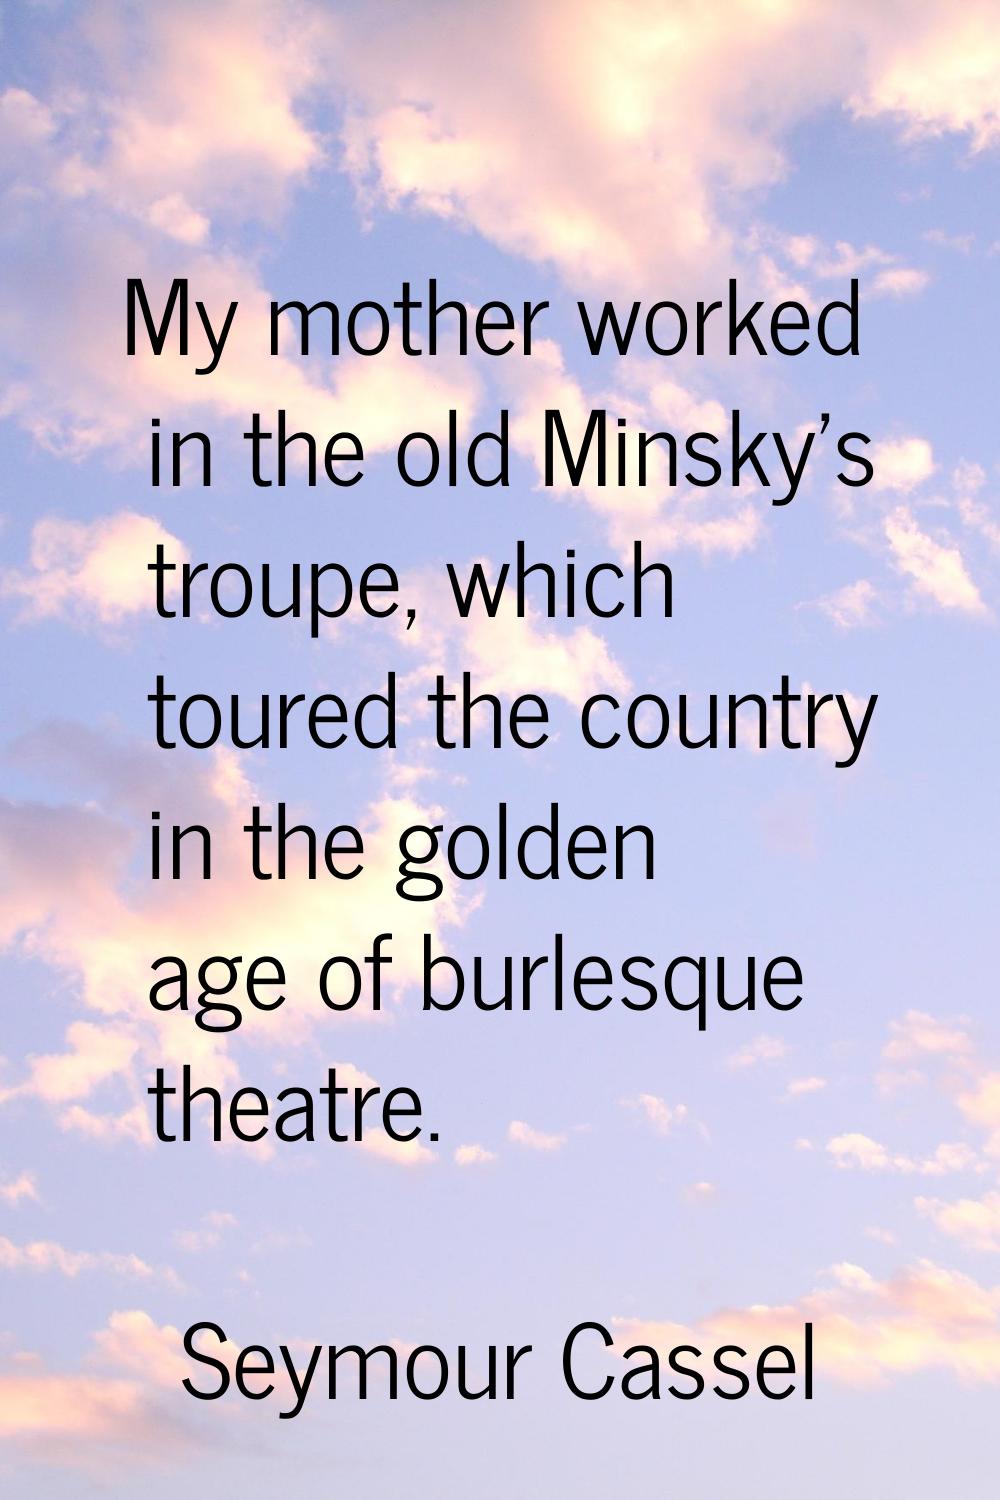 My mother worked in the old Minsky's troupe, which toured the country in the golden age of burlesqu